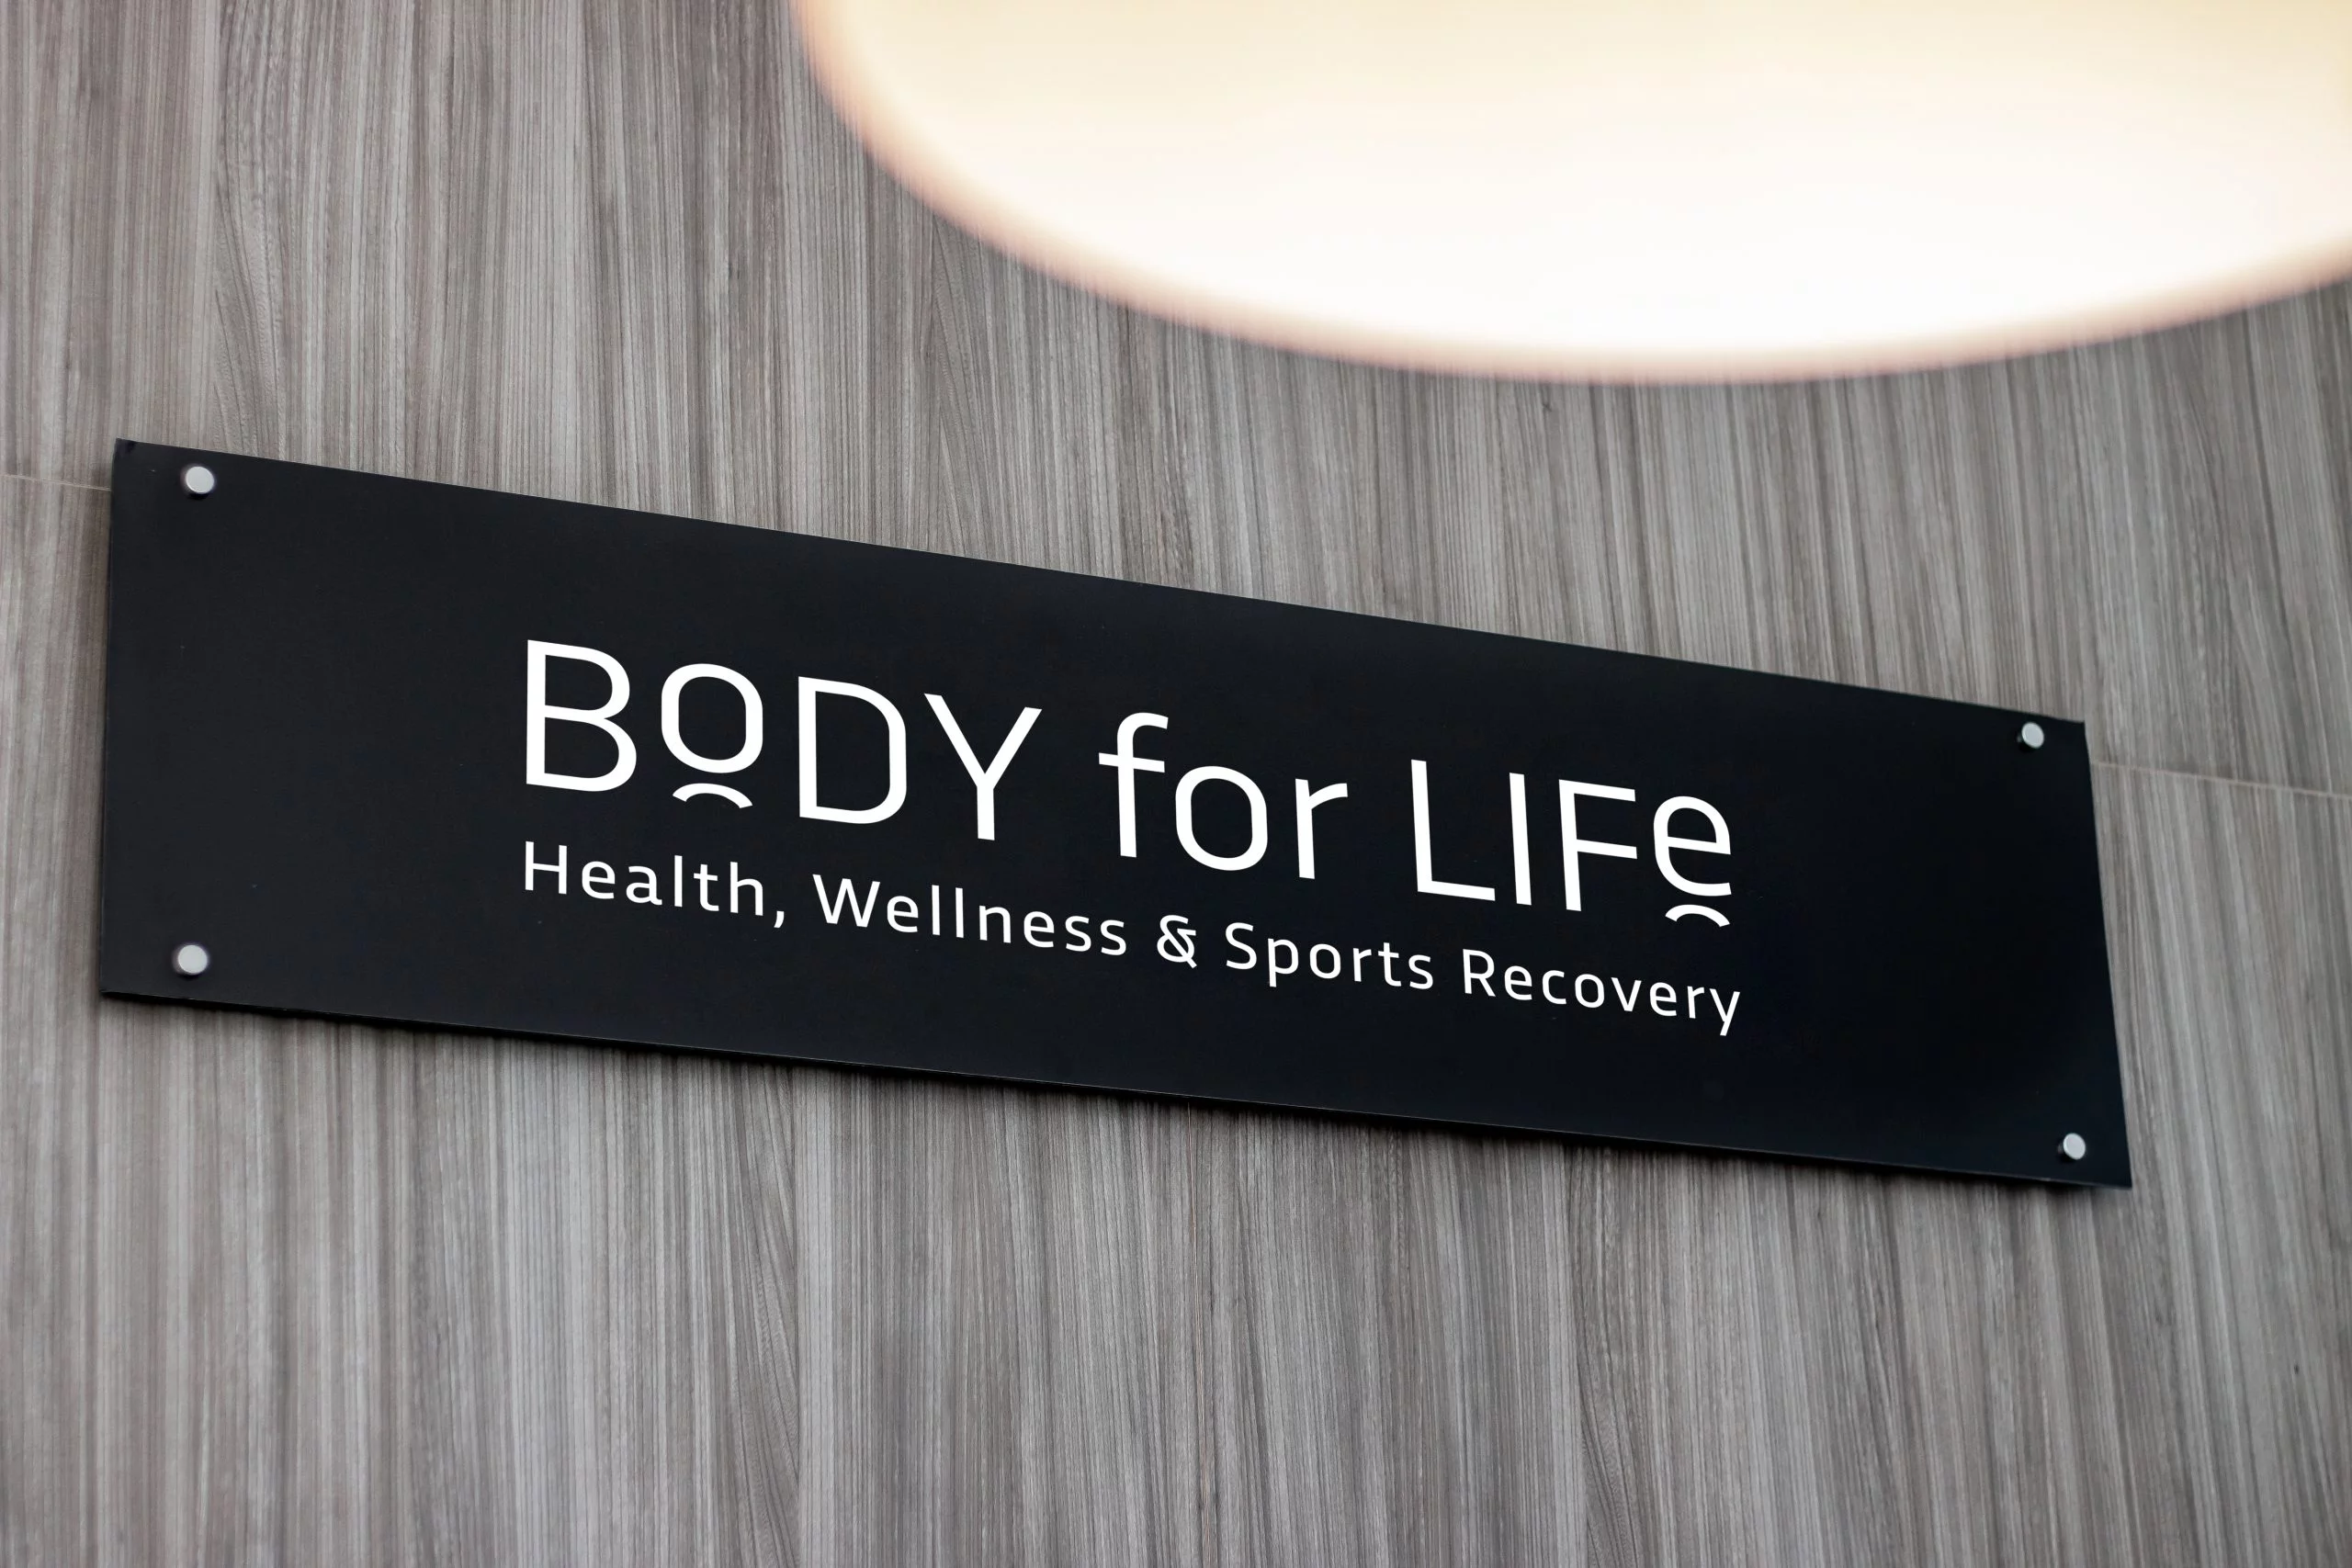 Body for Life Health, Wellness and Sports Recovery sign